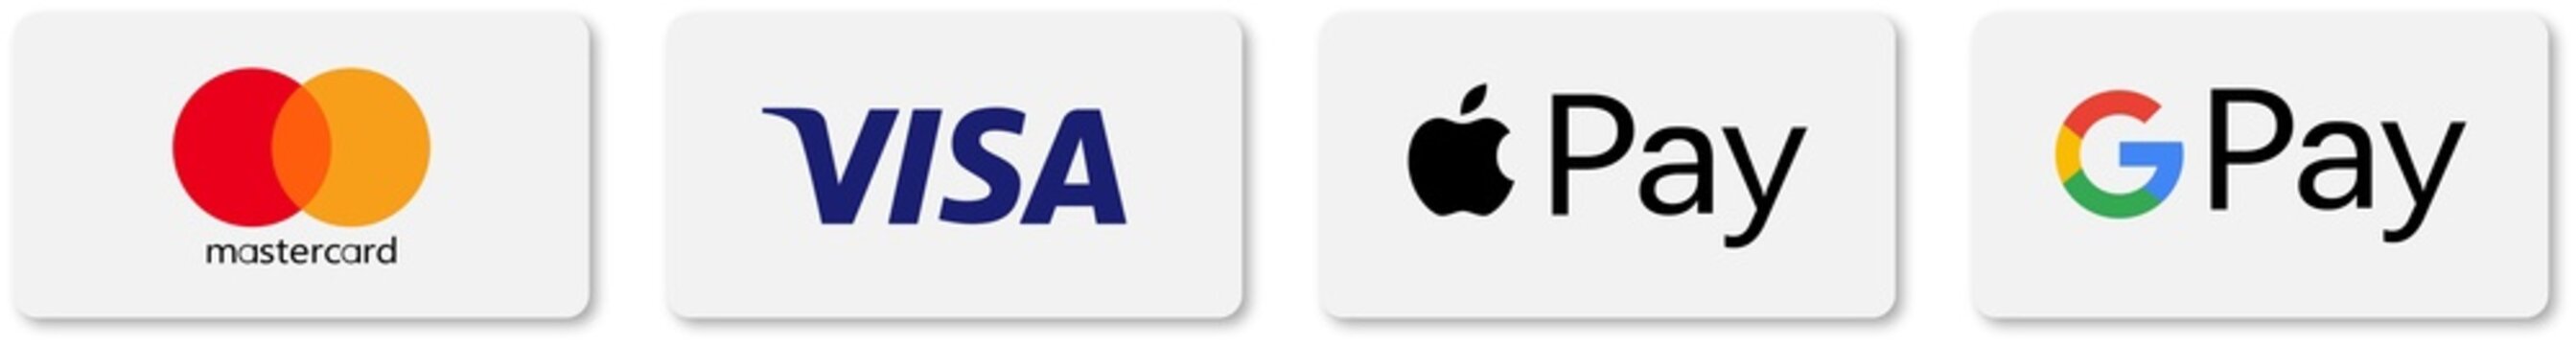 Buttons of popular payment systems mastercard, visa, apple pay, google pay. Buttons for a website are rectangular with rounded edges. PNG image
Buttons of popular payment systems mastercard, visa, app